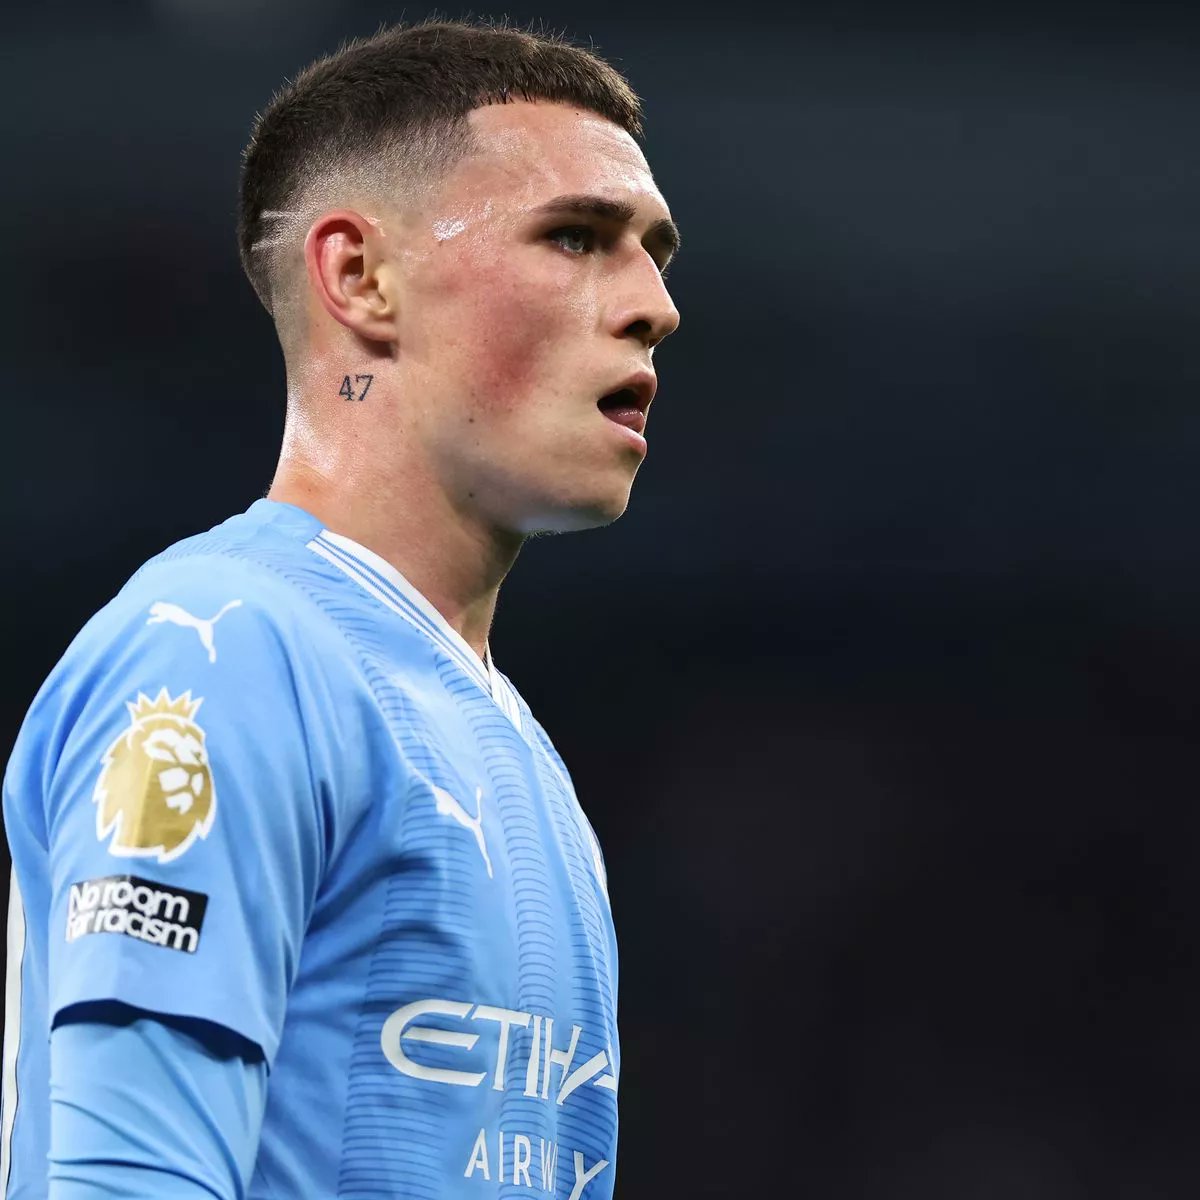 🎙️ Phil Foden: “I could never have dreamed to have won this amount of trophies at the age of 23, it’s a joke. Some people don’t finish their career with what I’ve won.”

UCL: 🏆
PL: 🏆🏆🏆🏆🏆
FA Cup: 🏆🏆
League Cup: 🏆🏆🏆🏆
Community Shield: 🏆🏆
UEFA Super Cup: 🏆

✍️ BBC